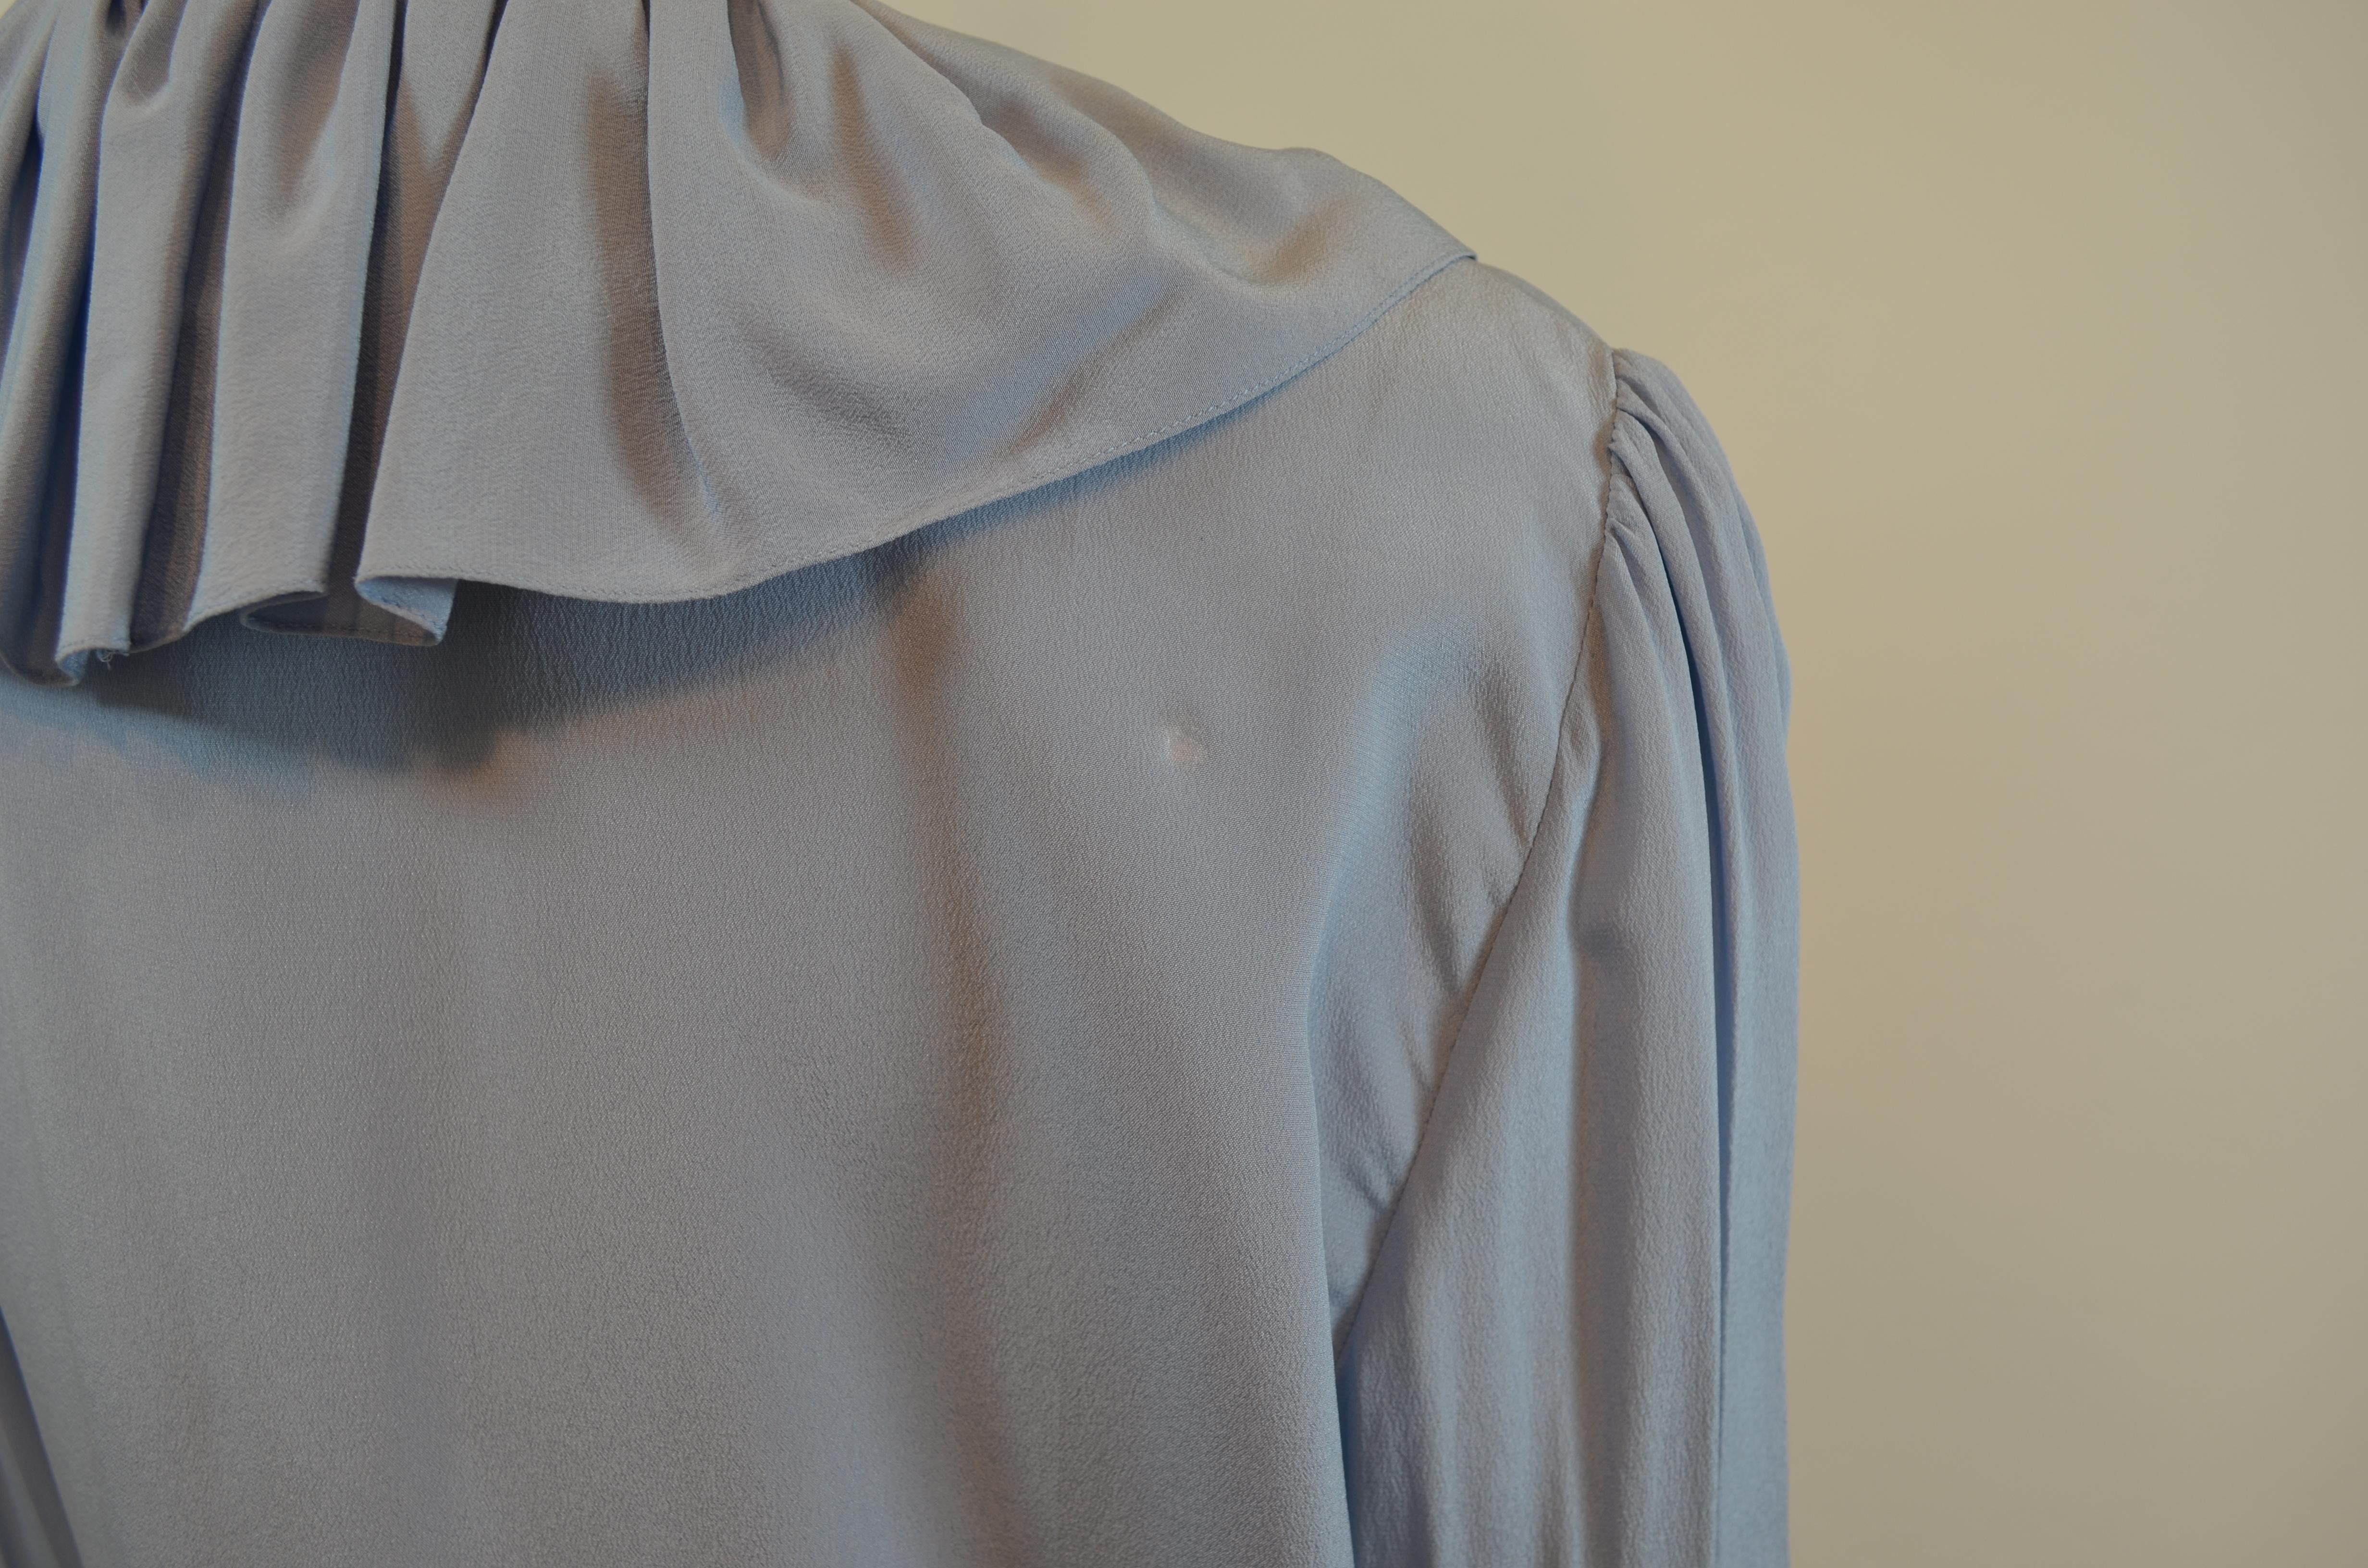 NWT Gucci Powder Blue Ruffled Blouse In Excellent Condition For Sale In Carmel, CA